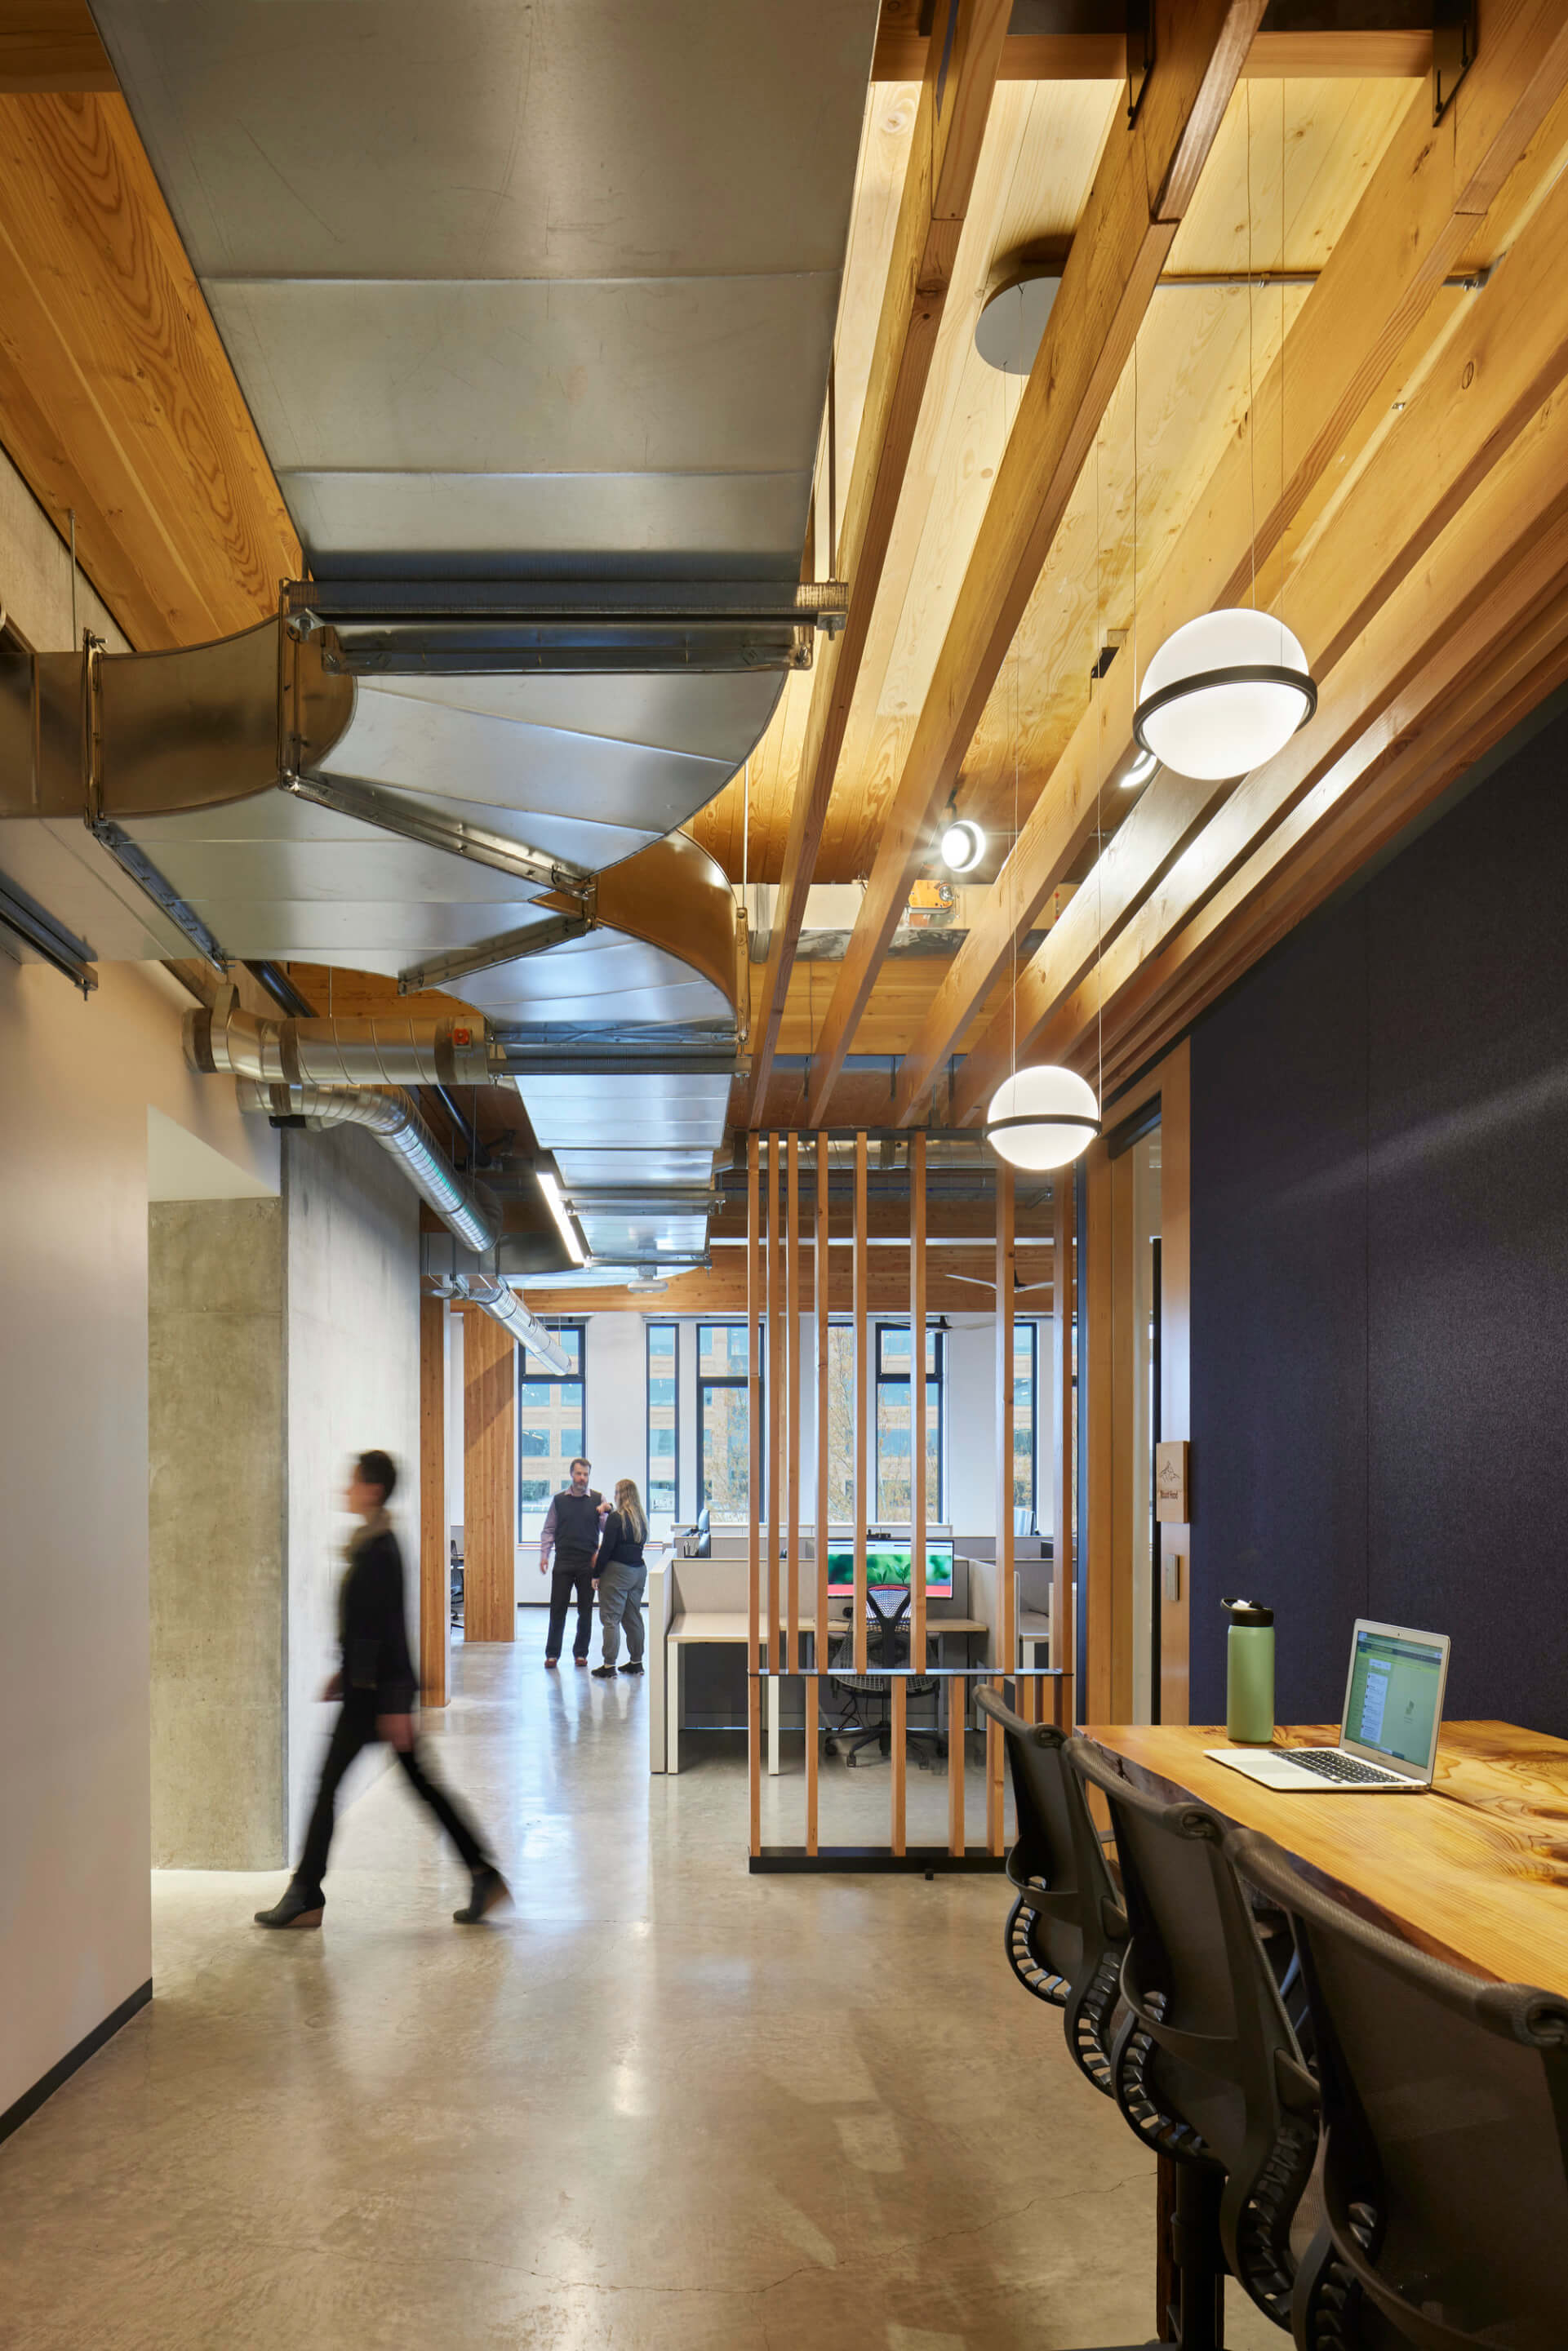 exposed wood and ductworks in an open office space